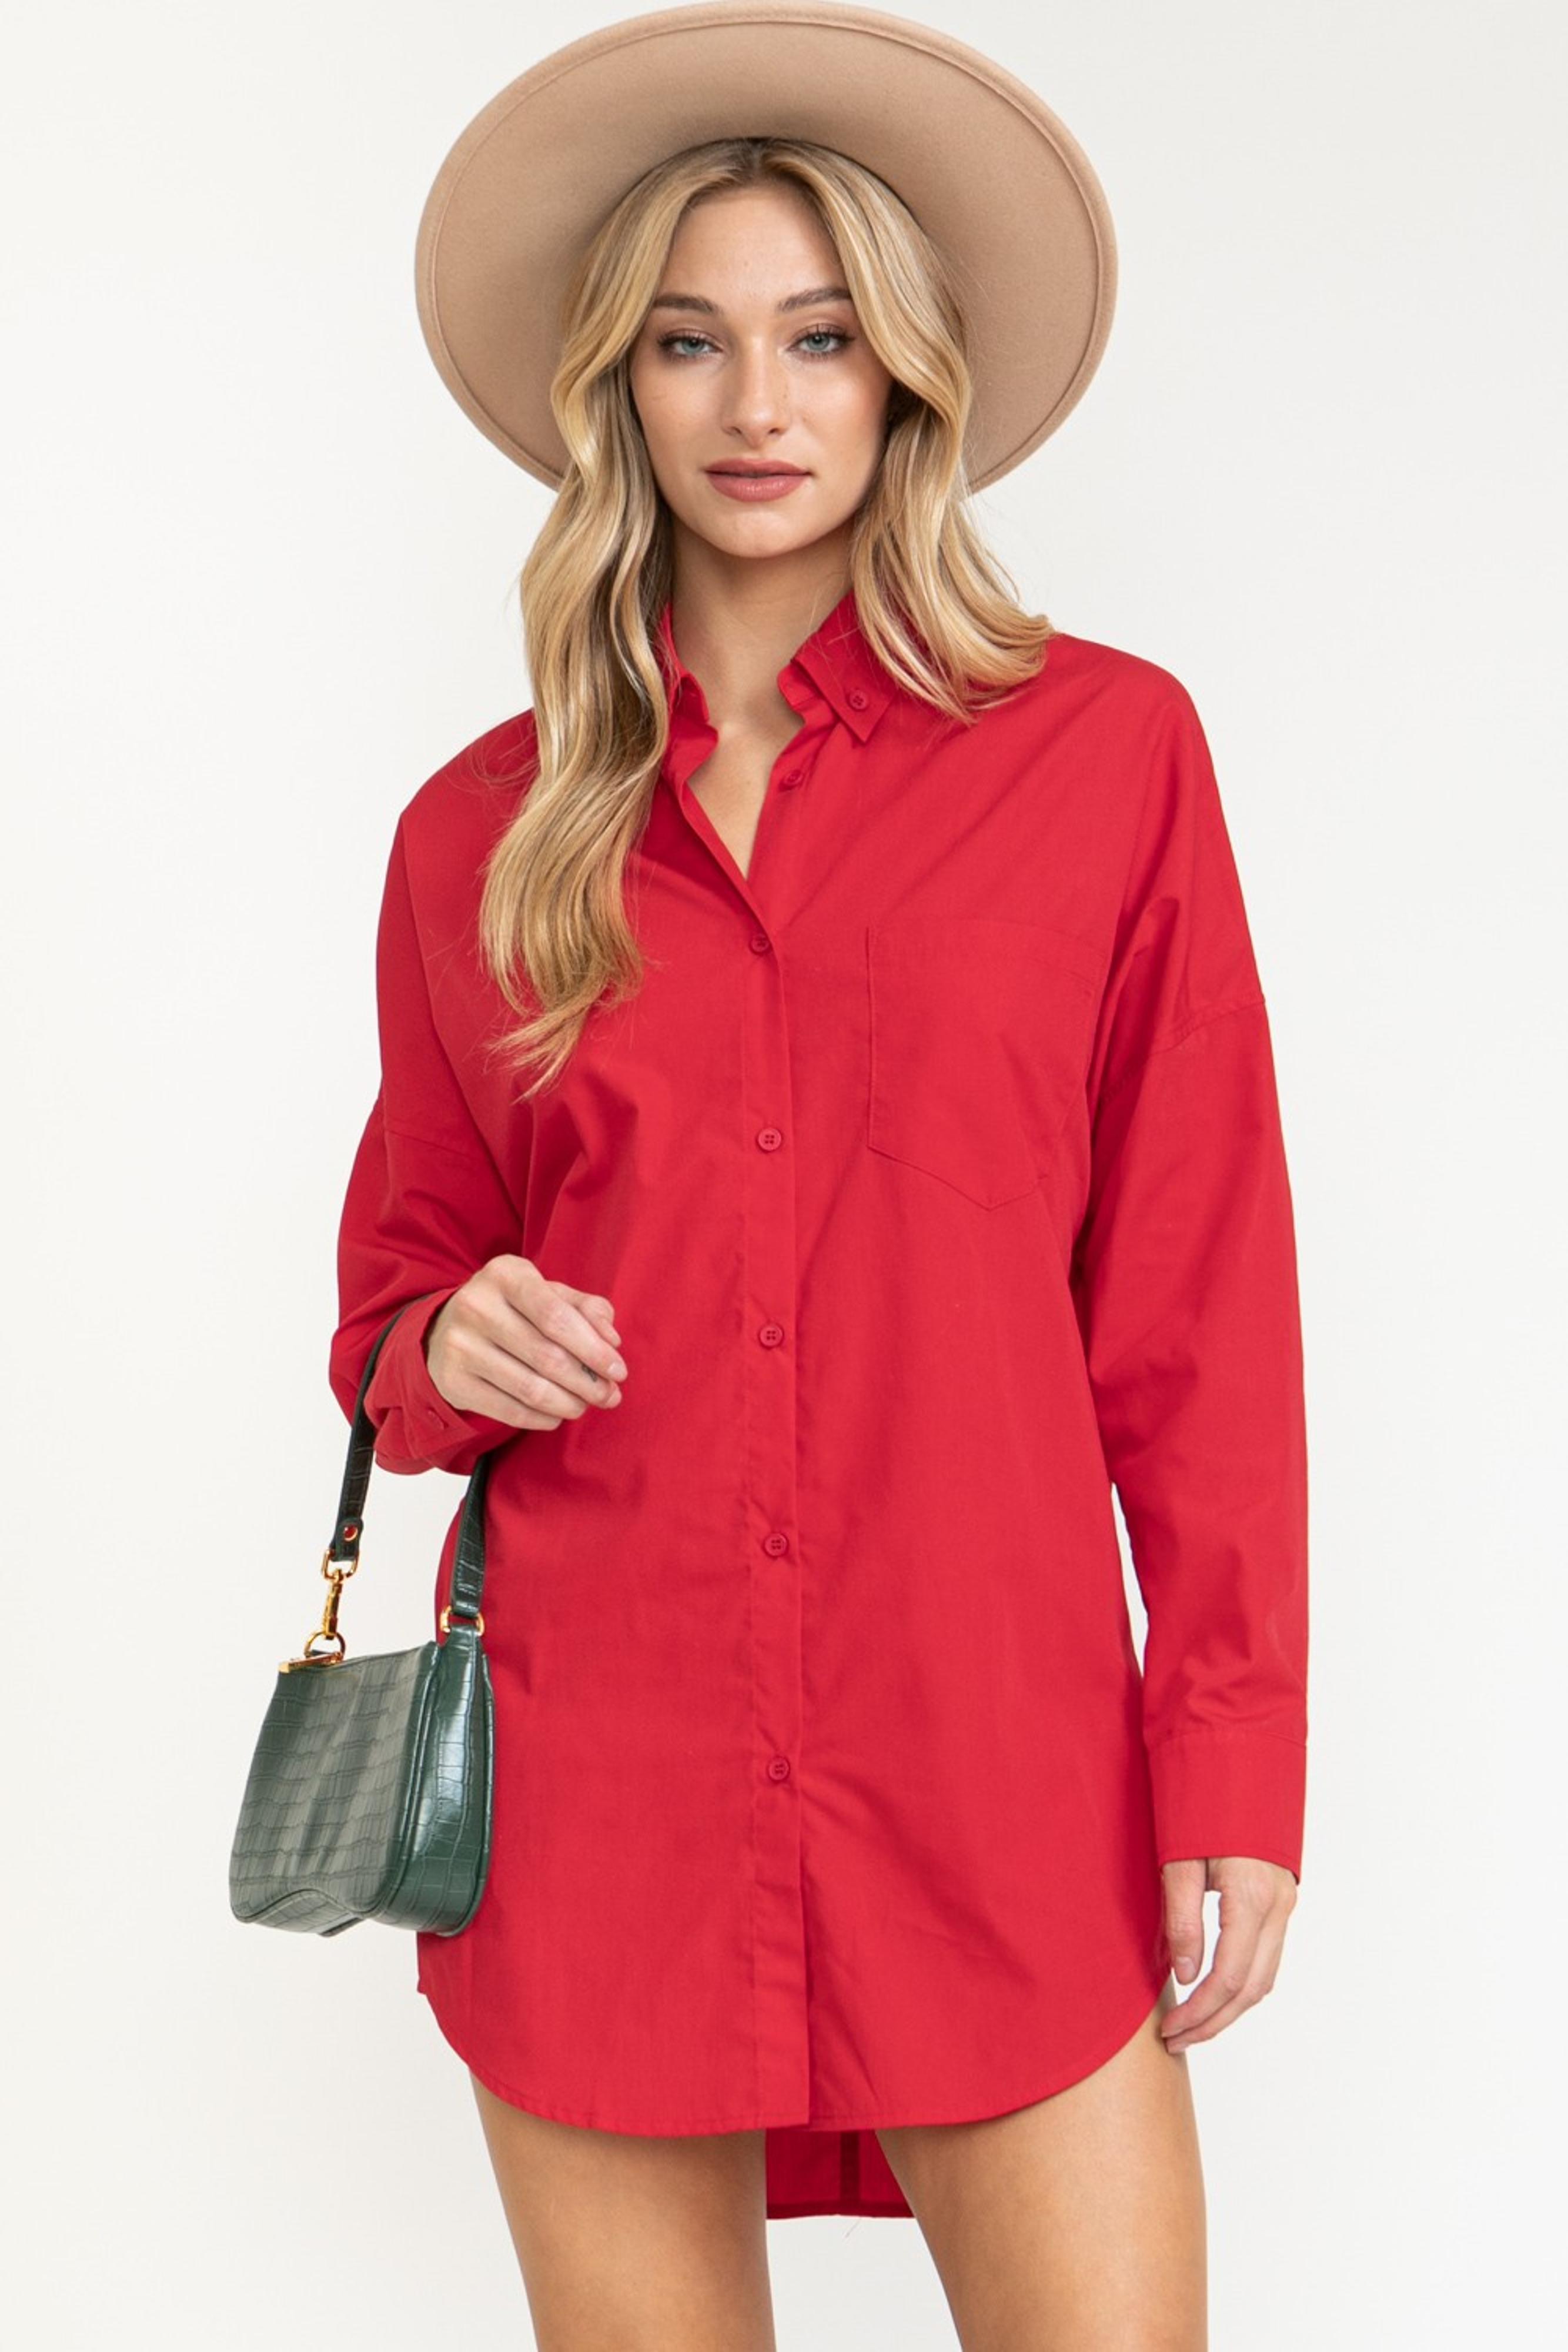  Whole Picture Oversized Collared Shirt